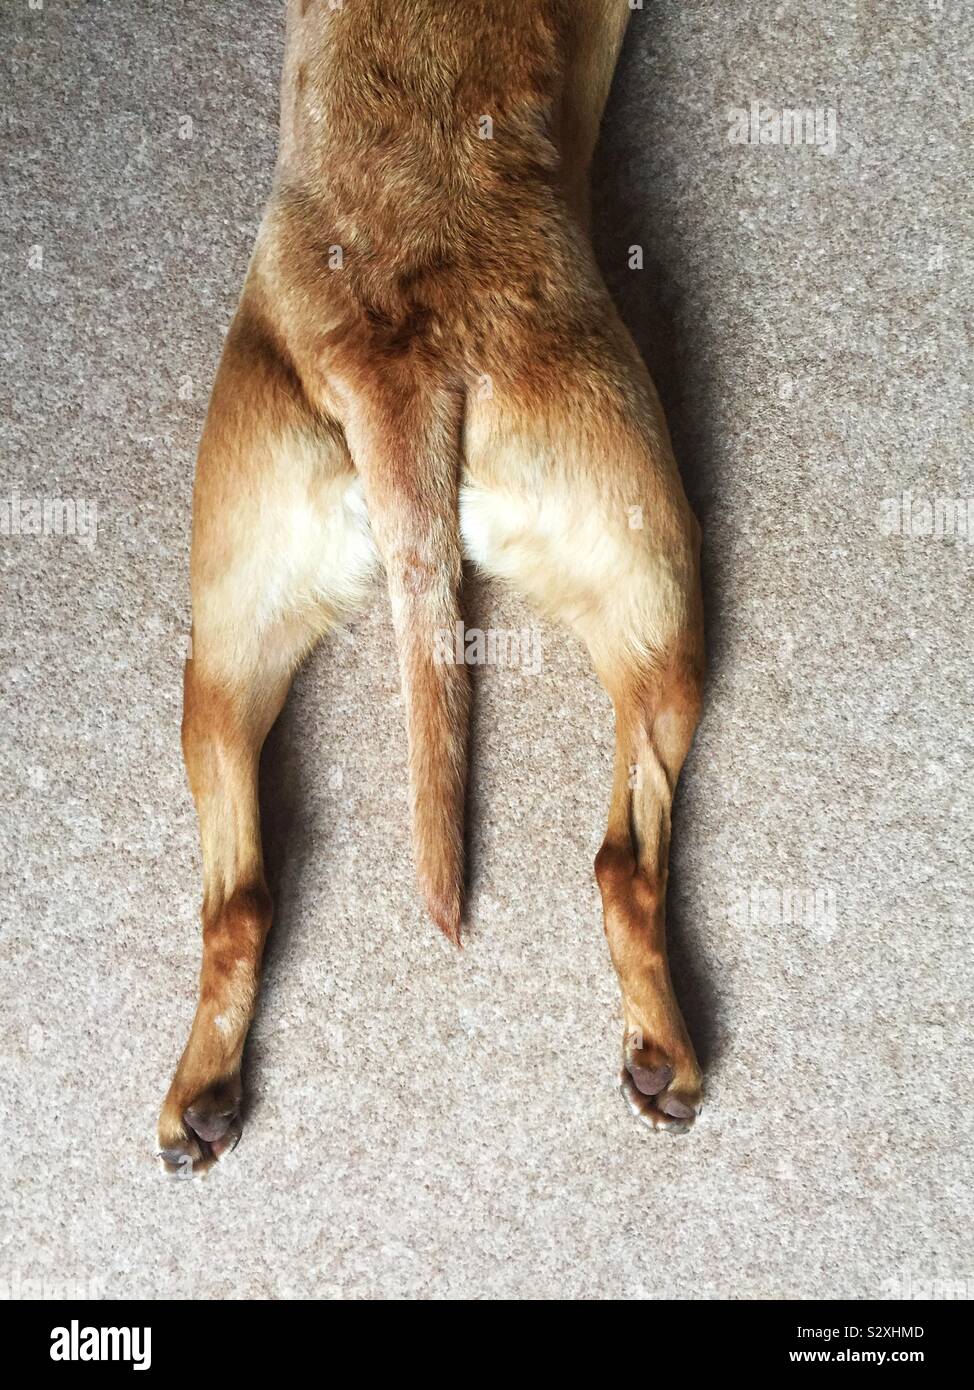 Looking down from above onto the back legs of a Labrador dog with its legs and tail splayed and stretched on the floor in a funny animal image Stock Photo